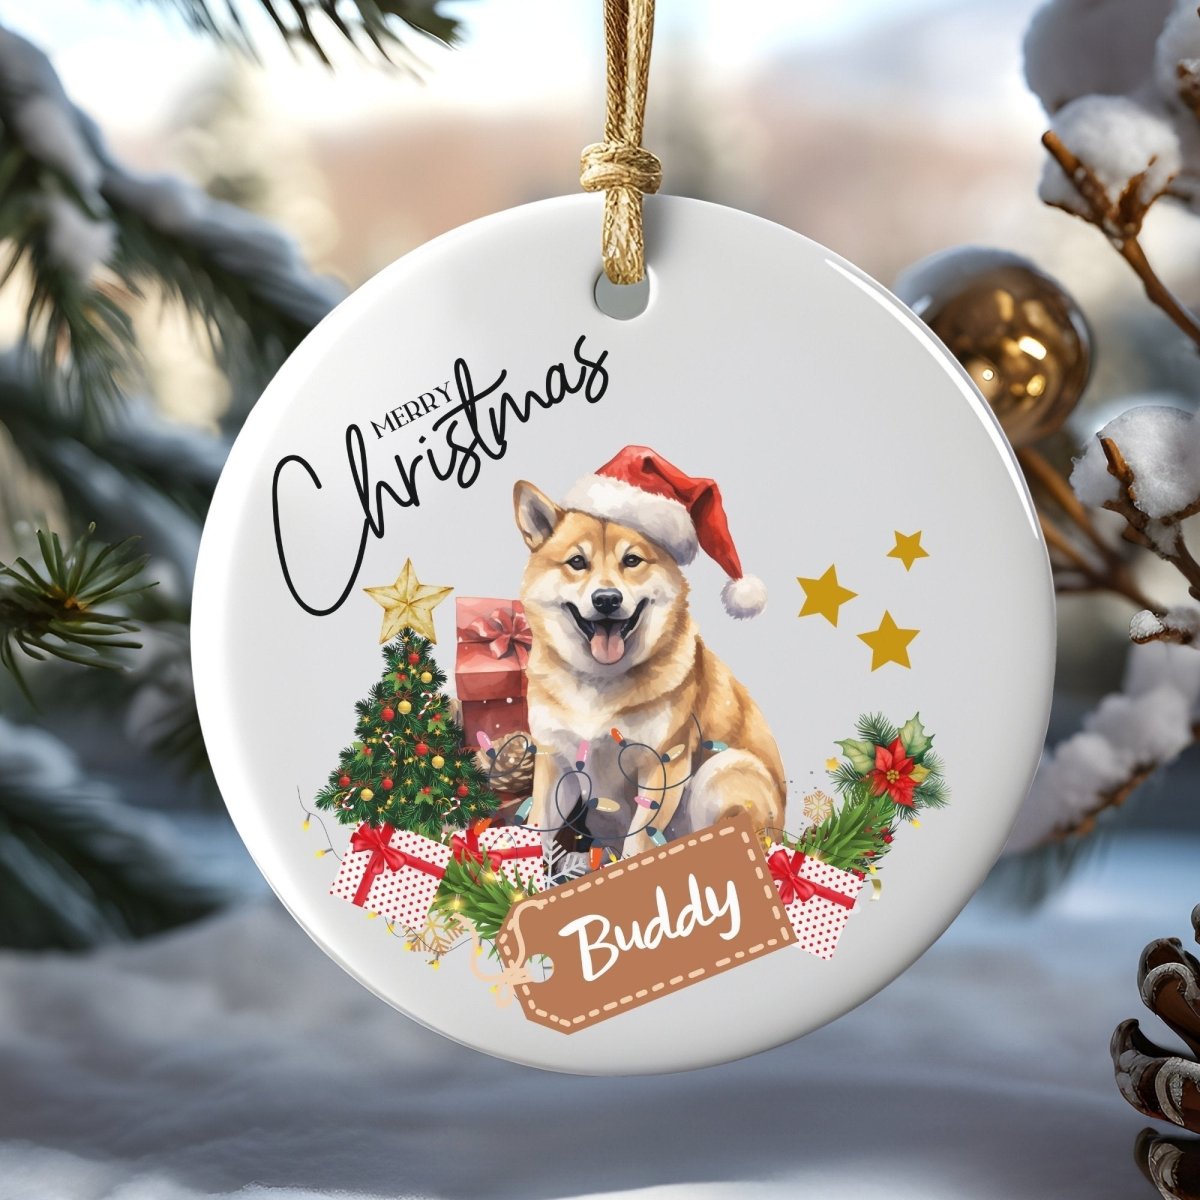 Personalised Dog Ornament - Custom Round Ceramic Pet Ornament, First Christmas with Dog, Memory Tree Decoration, Dog Lover Gift - Everything Pixel